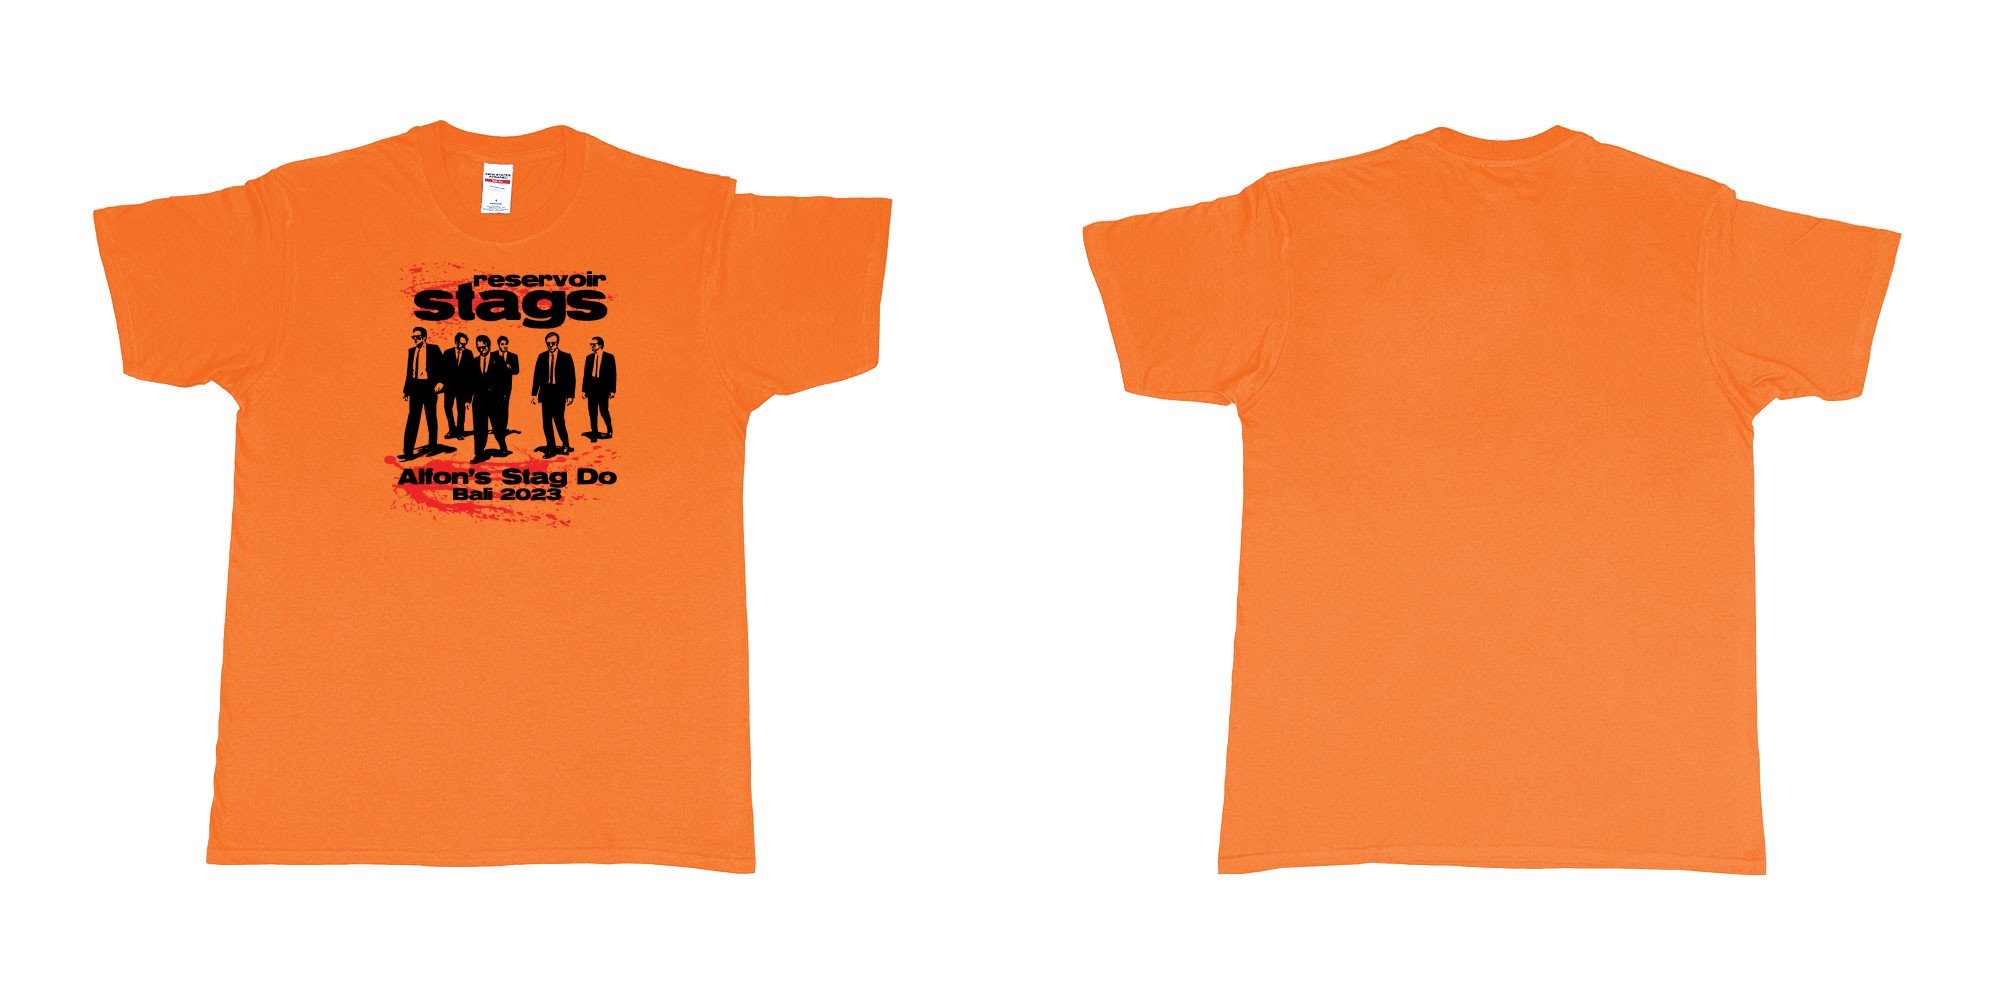 Custom tshirt design Reservoir Dogs Stag in fabric color orange choice your own text made in Bali by The Pirate Way